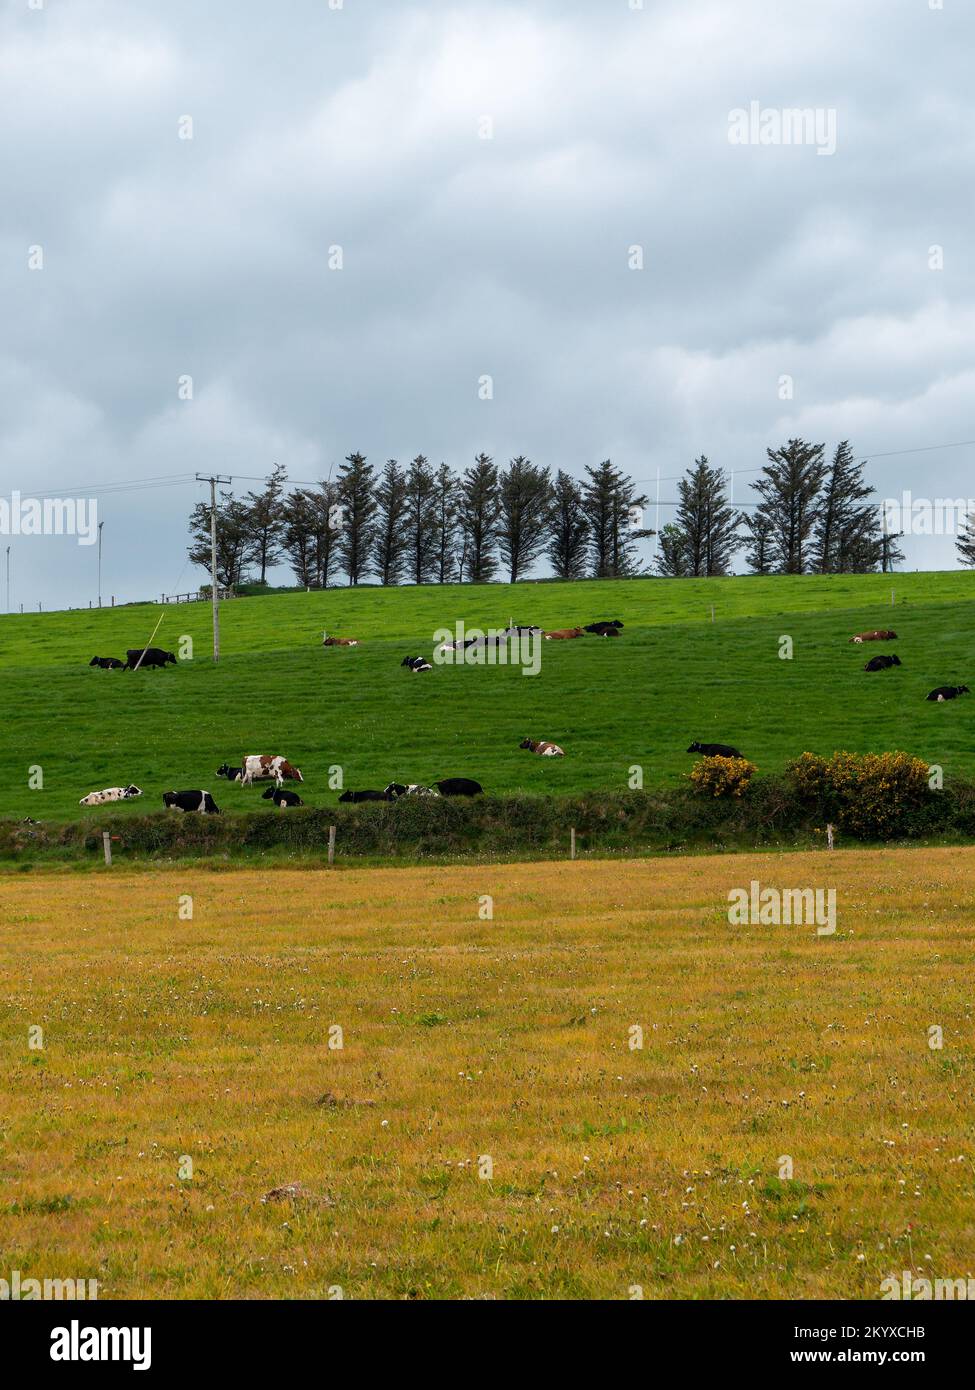 Village fields and pastures. Cows in a meadow. Agrarian landscape. Irish farmland. Green field with trees, clouds Stock Photo